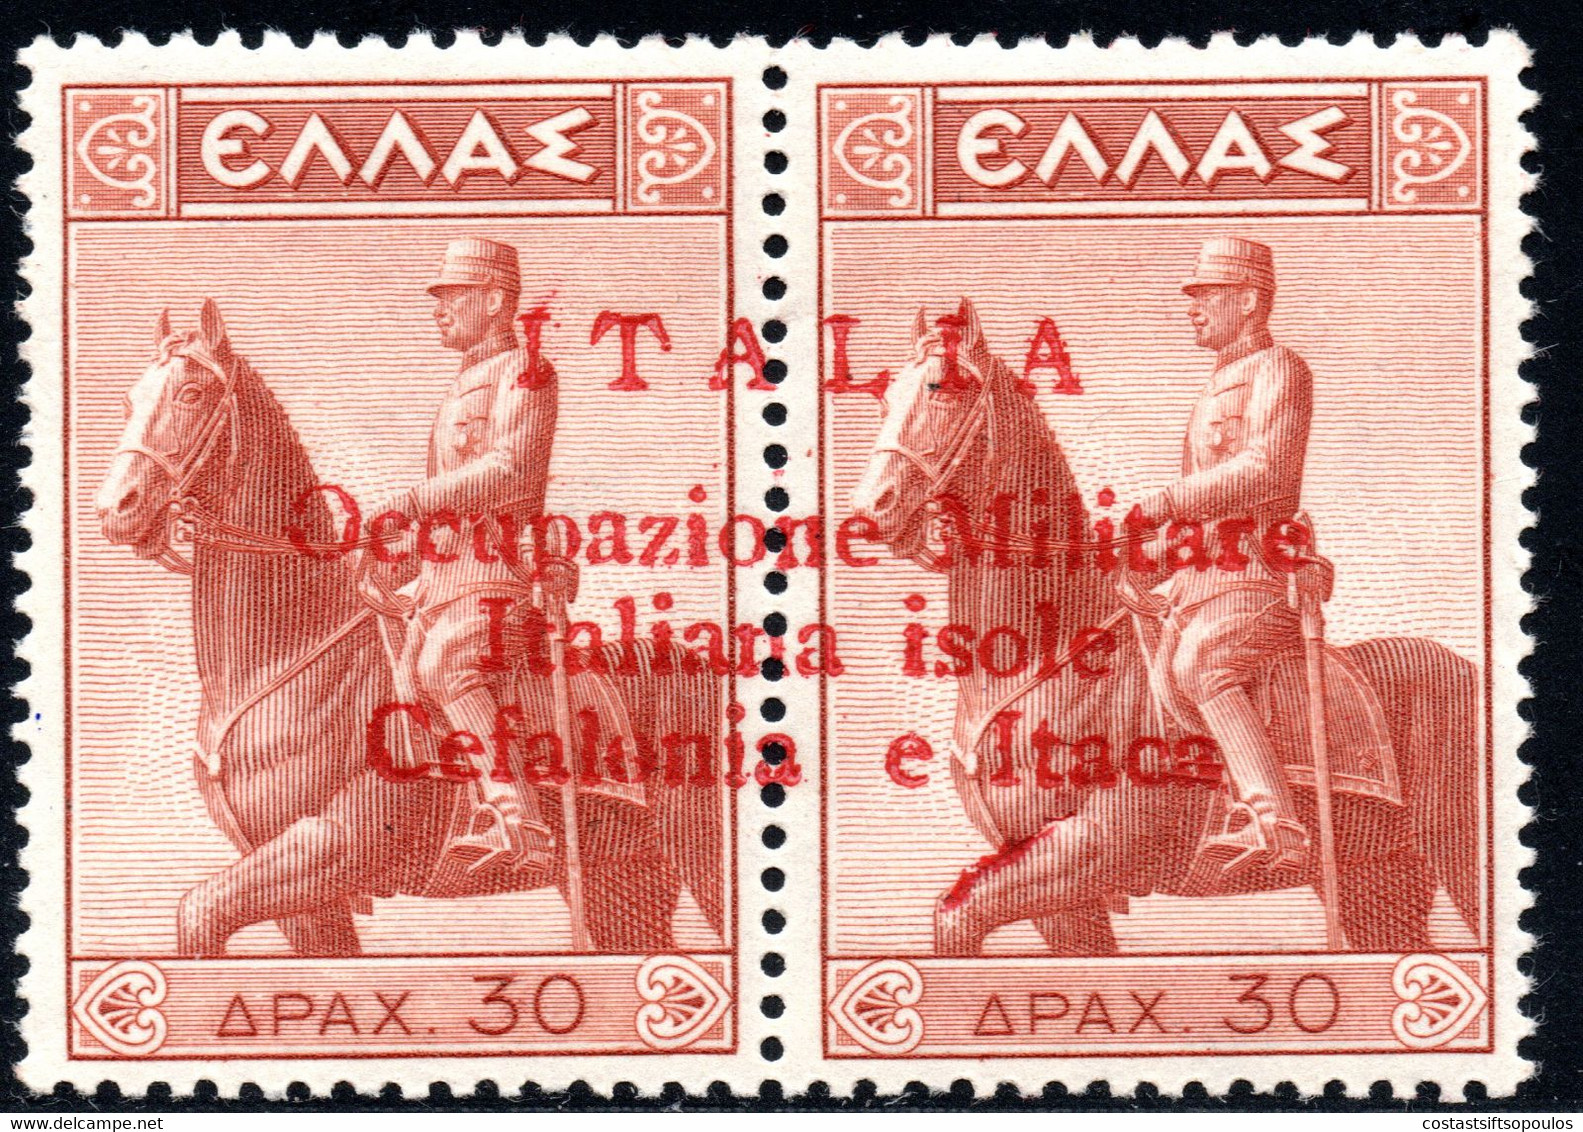 165.GREECE,ITALY,IONIAN,CEFALONIA,1941 30DR.RIDER,RED OVERPRINT???,MNH,POSSIBLY PRIVATE - Iles Ioniques